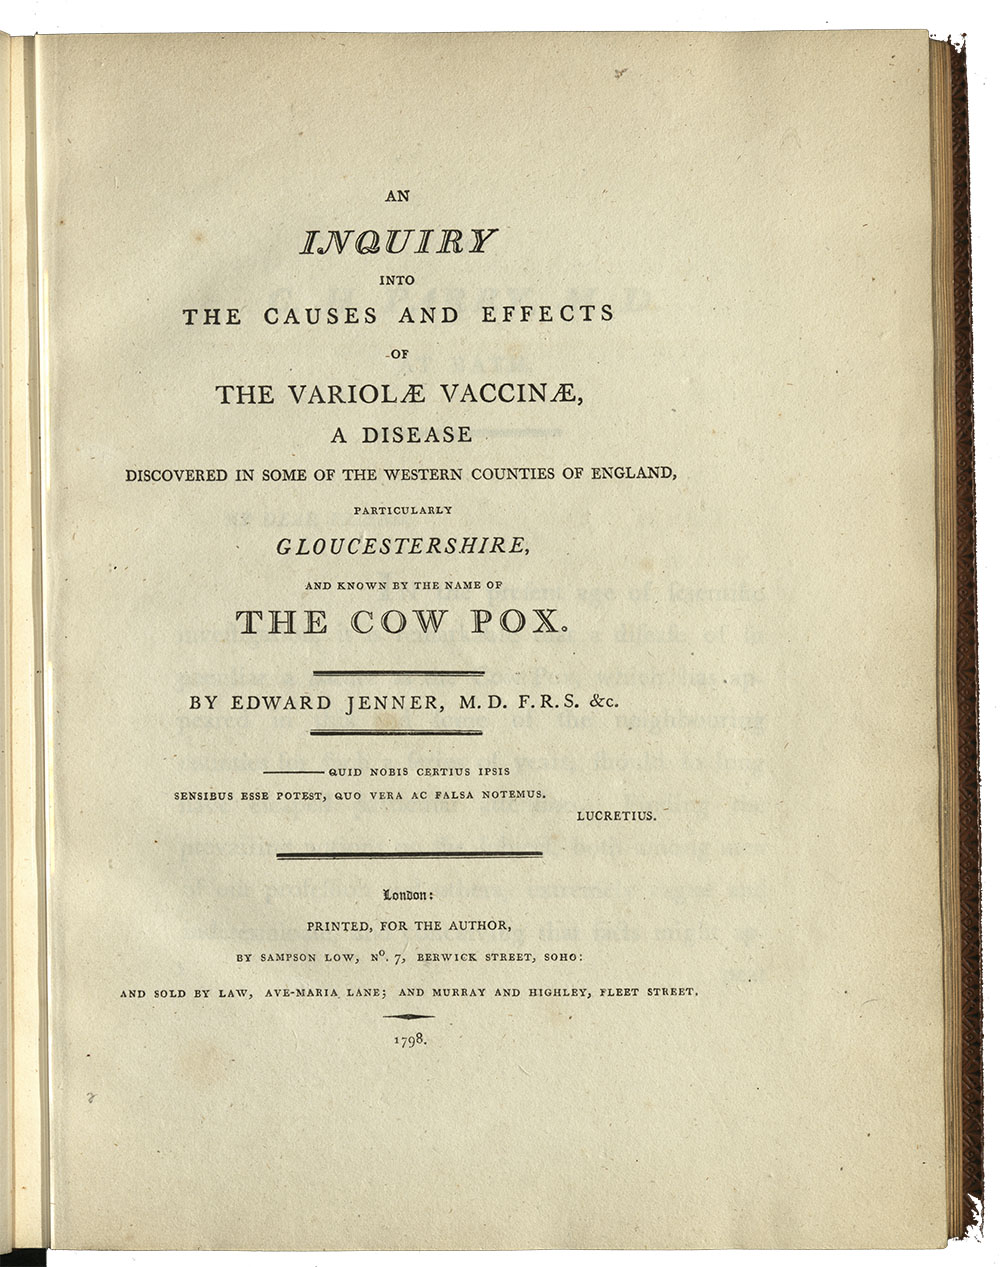 <p>Title page of Jenner’s groundbreaking ‘Inquiry into the Causes and Effects of the Variolae Vaccinae’, first published in 1798. In it Jenner included case studies and observation drawings to back up his theory that cowpox could be used as a vaccination against smallpox.</p>
